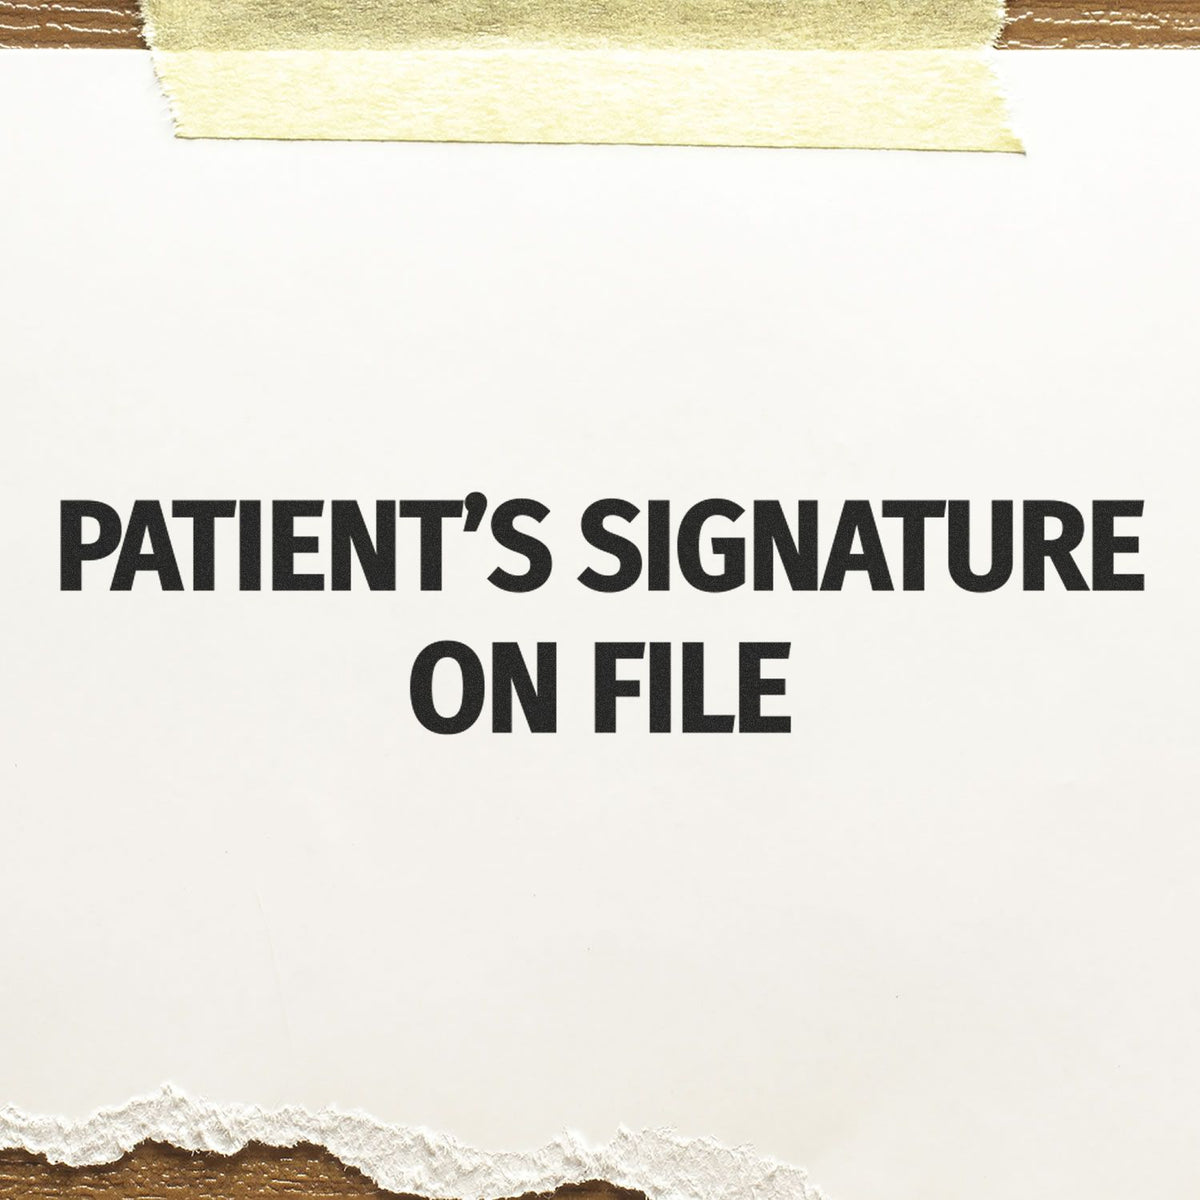 Large Patients Signature on File Rubber Stamp Lifestyle Photo